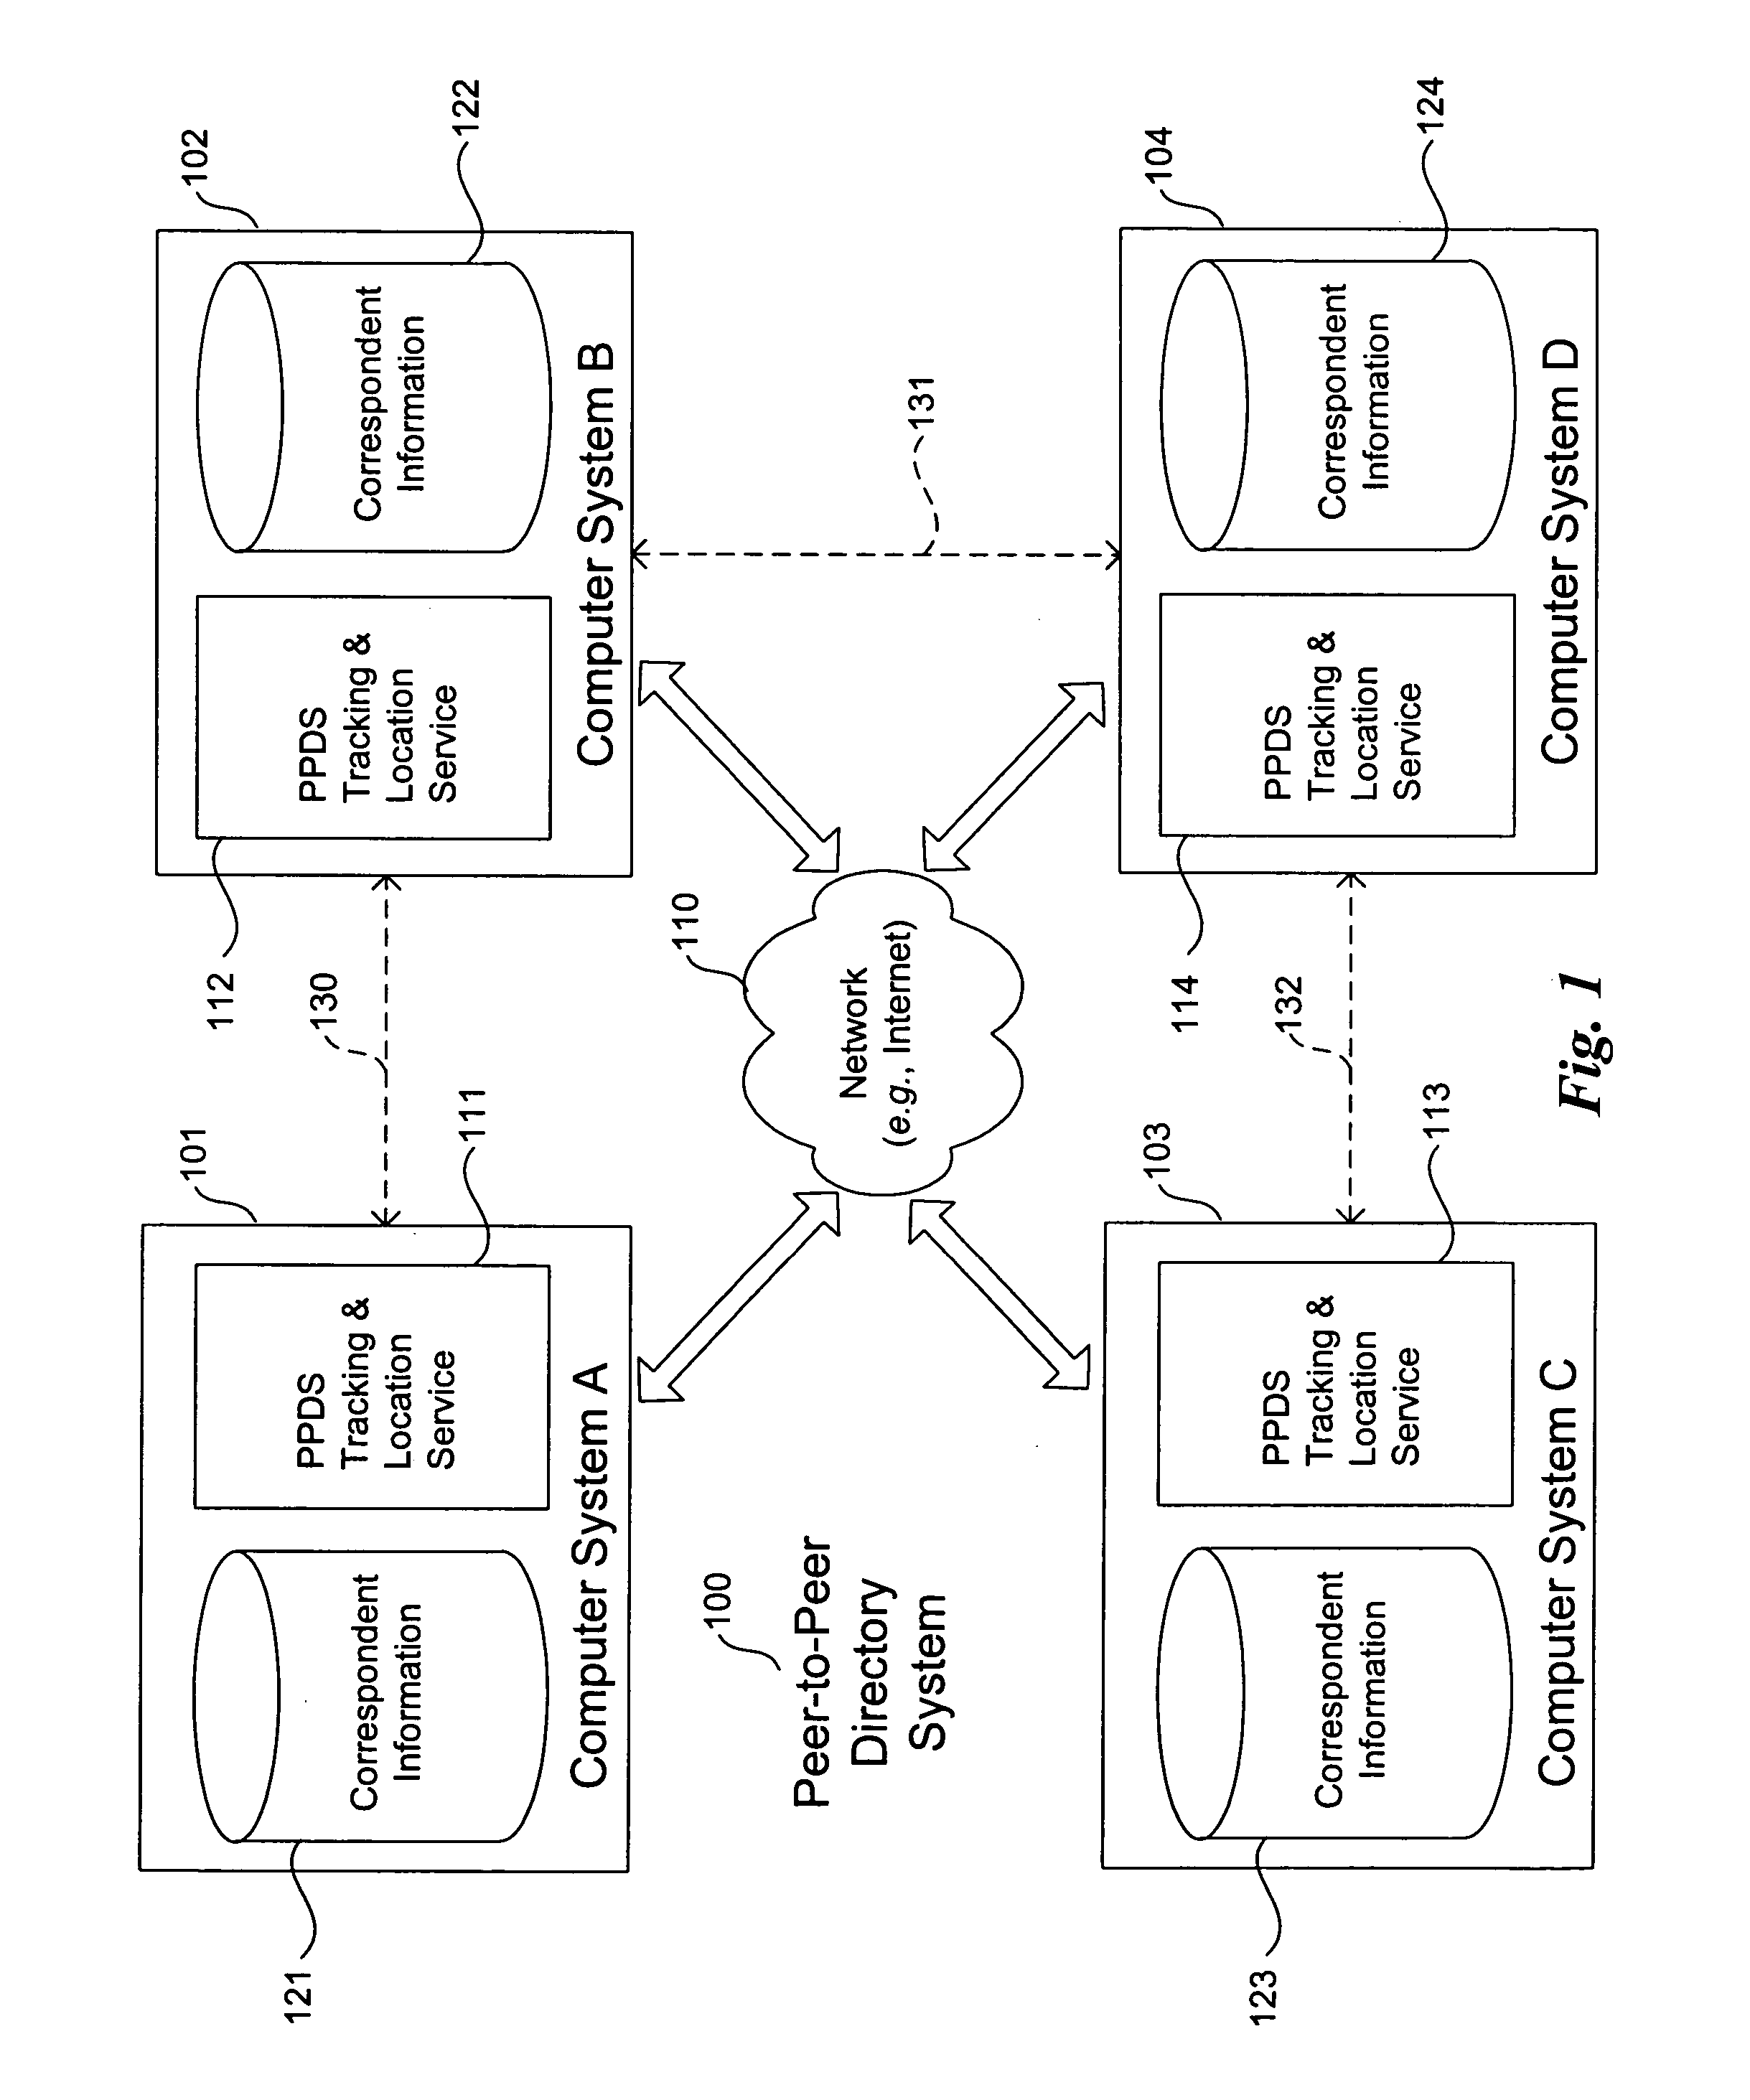 Method and system for peer-to-peer directory services